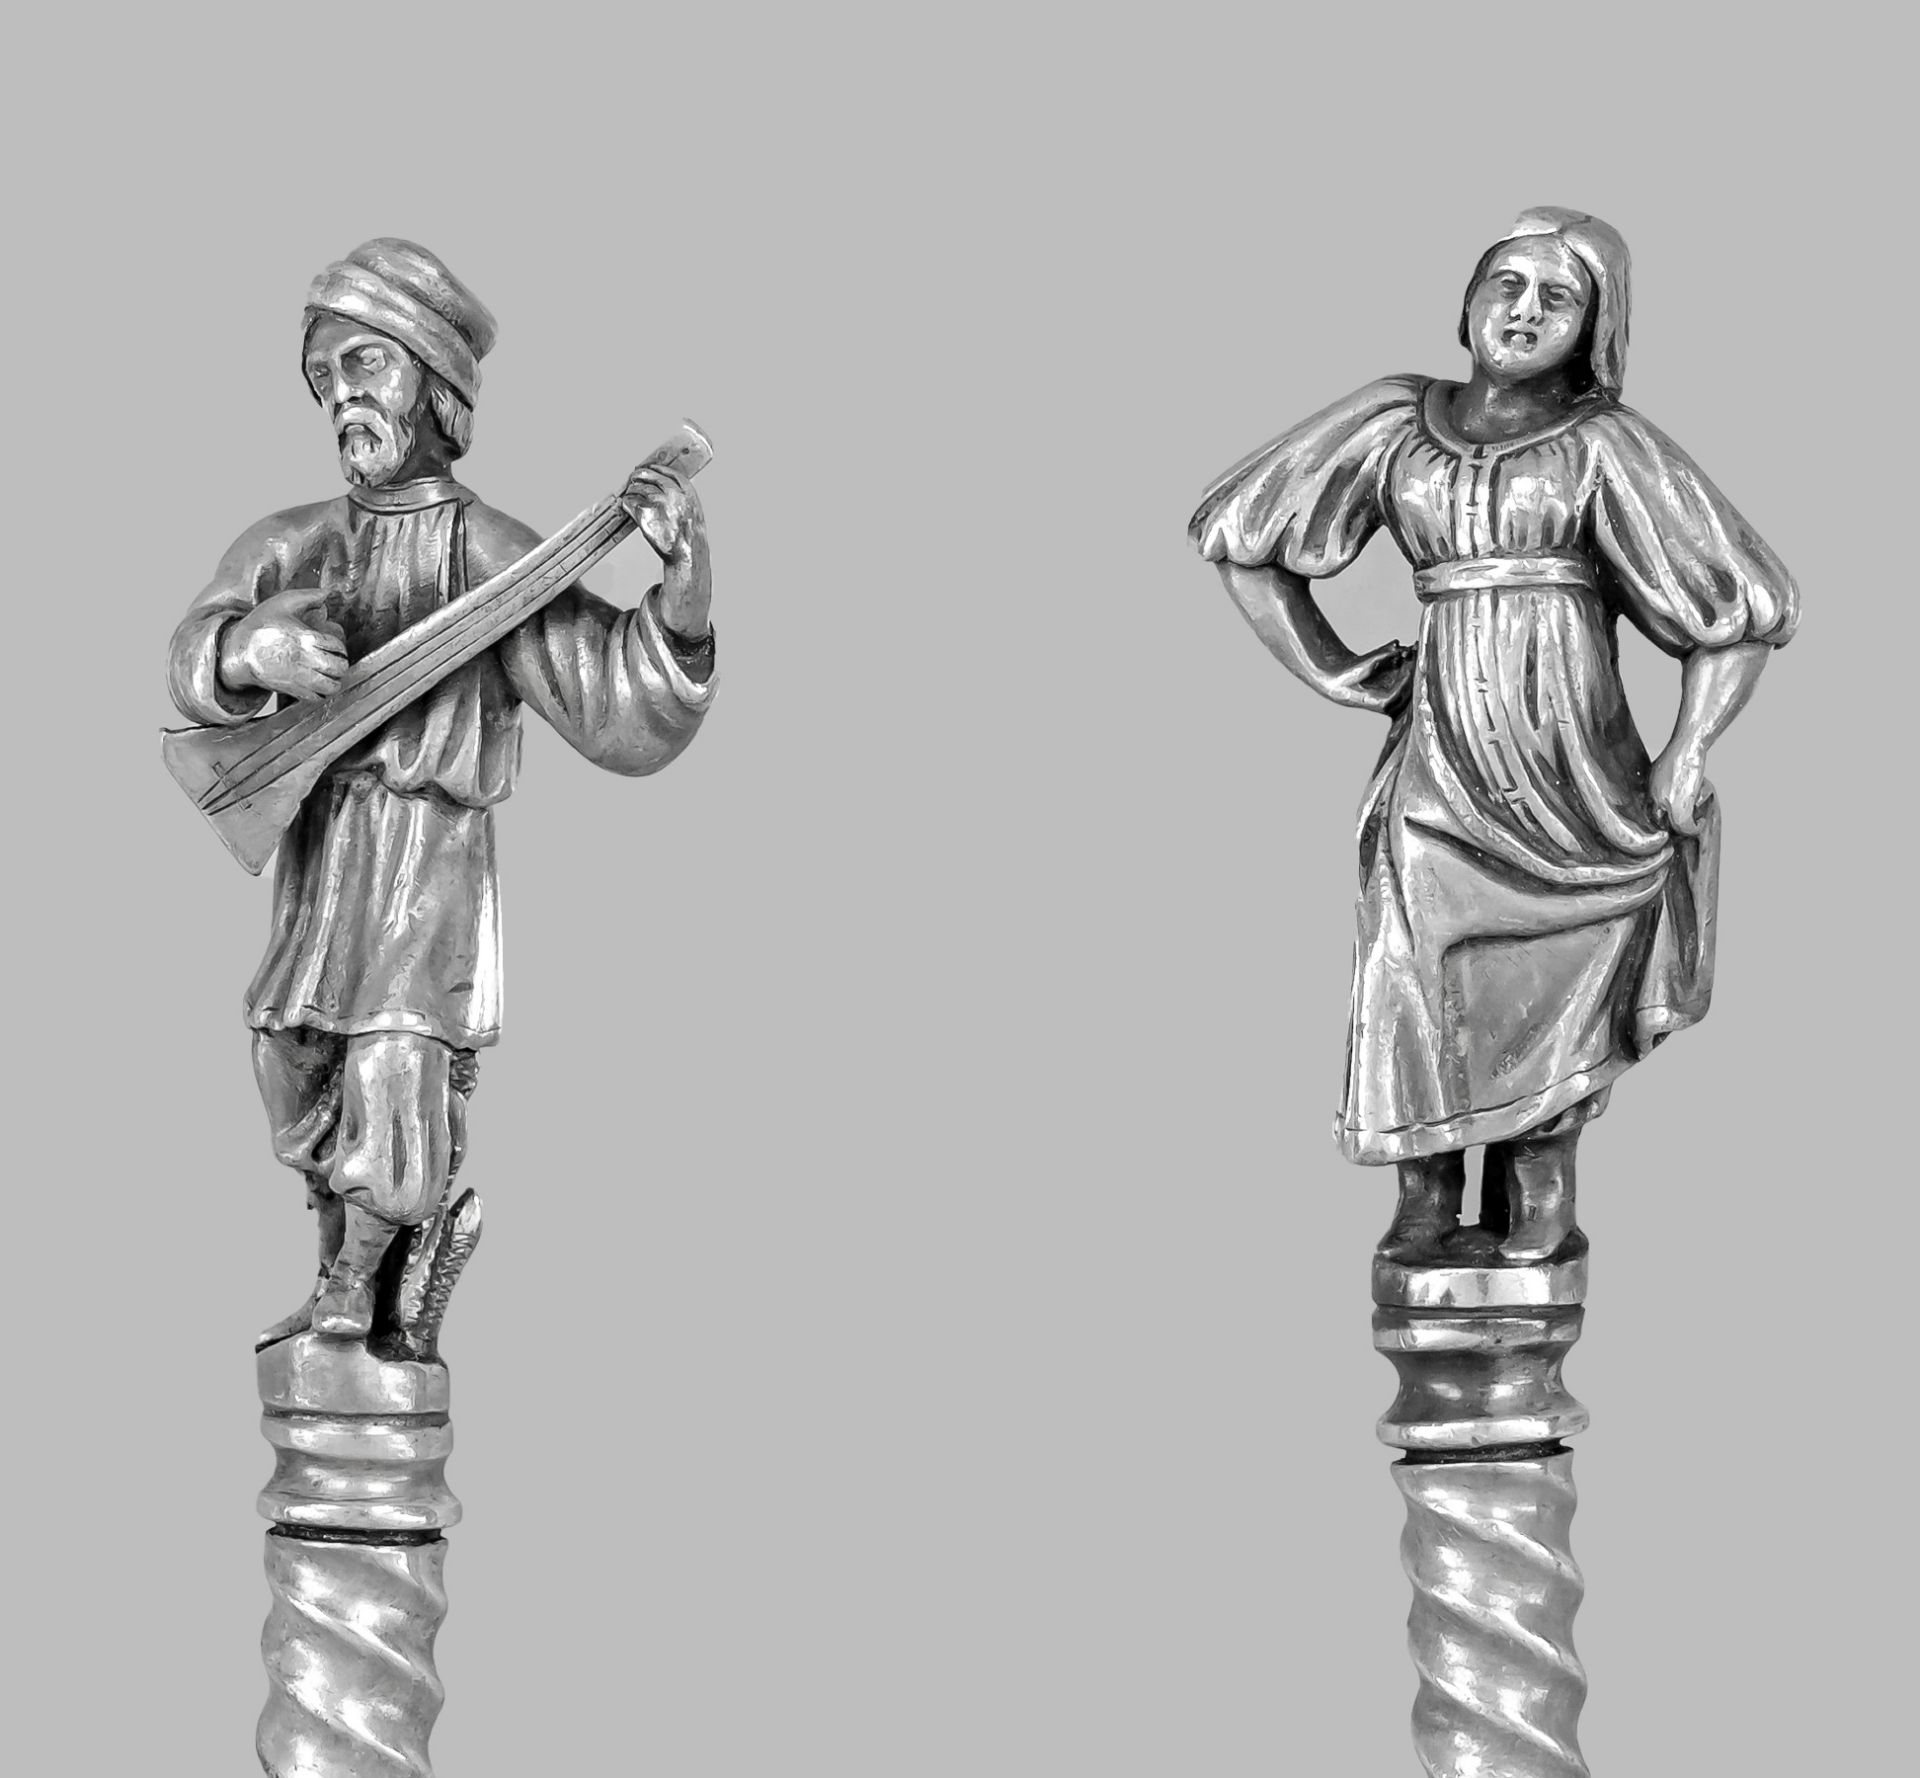 A pair of ornamental spoons, hallmarked Russia, 1877, Moscow city mark, struck hallmarks, Siber 84 - Image 3 of 3